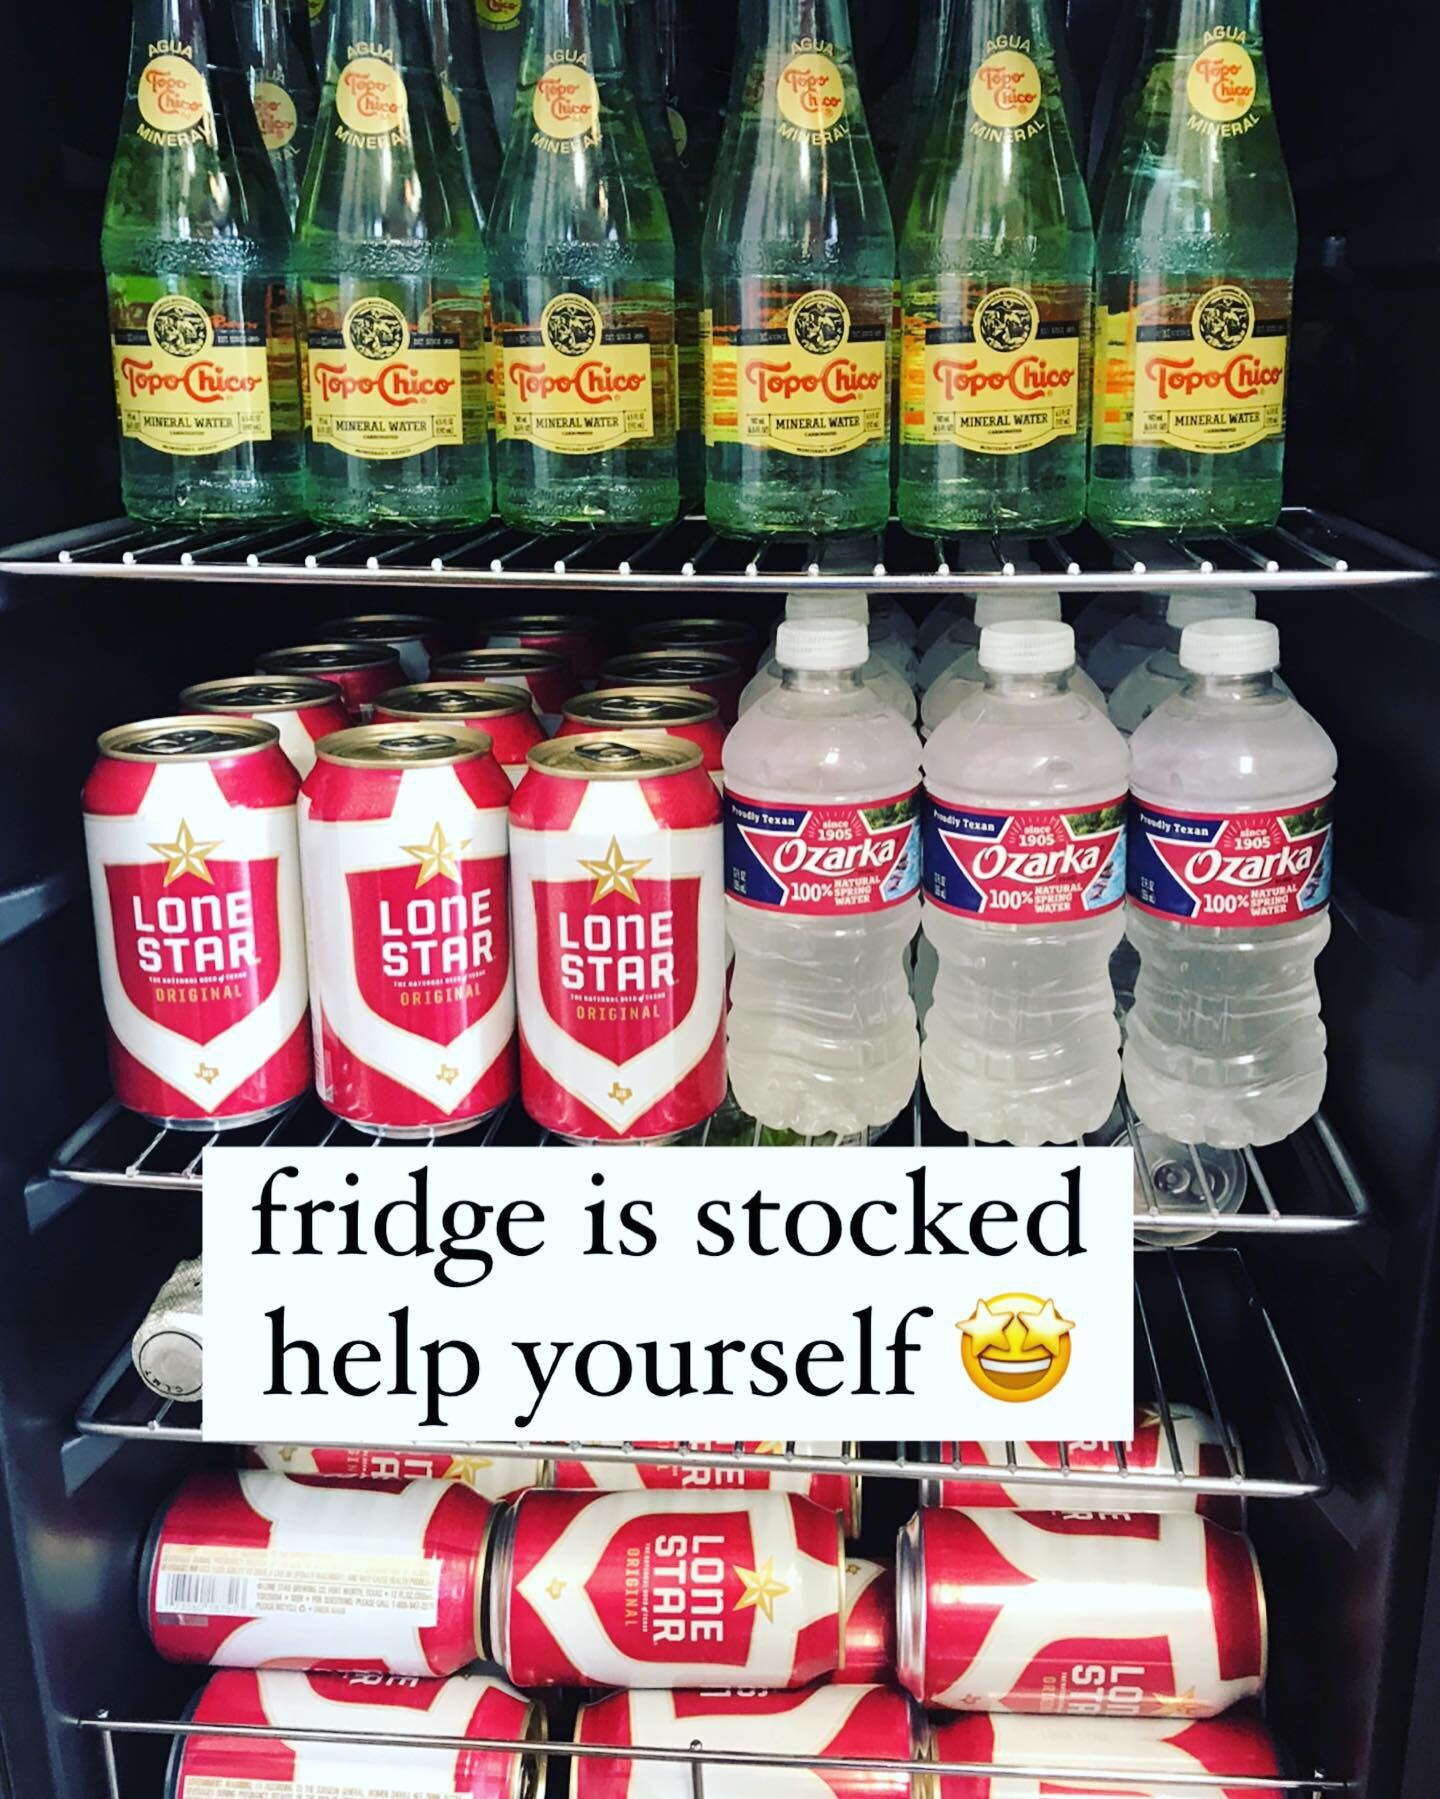 Don&rsquo;t be scared to open the mini fridge - it&rsquo;s for youuuu. help yourself to whatever you&rsquo;d like while you&rsquo;re waiting for your appt! 🖤
.
.
.
.
#nood #noodwax #sugaring #waxing #waxatx #waxingatx #waxingaustin #waxingbrentwood 